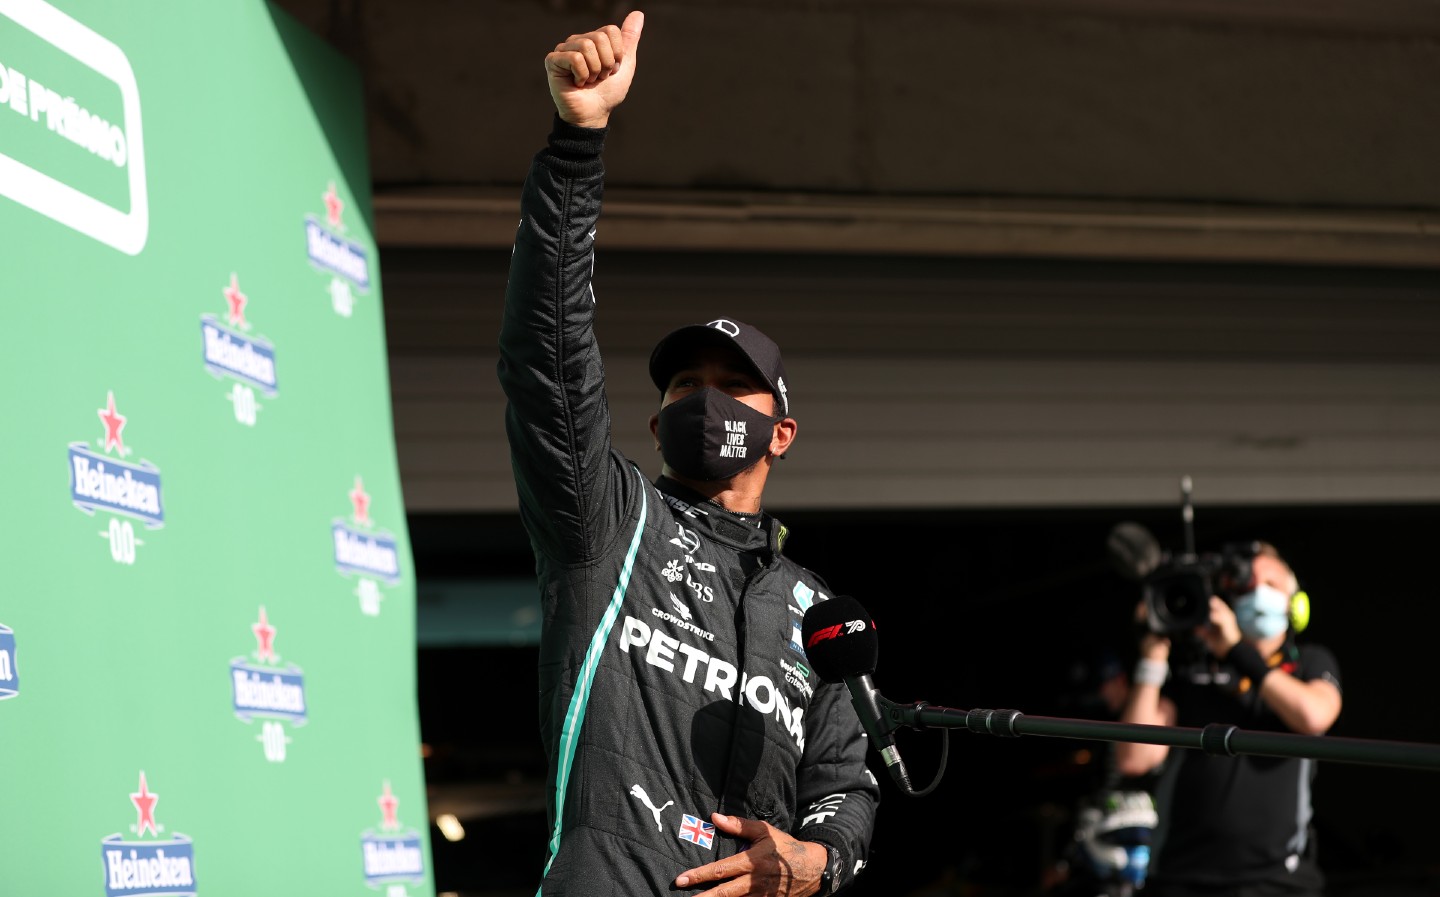 Lewis Hamilton has now won more F1 races than any driver in history